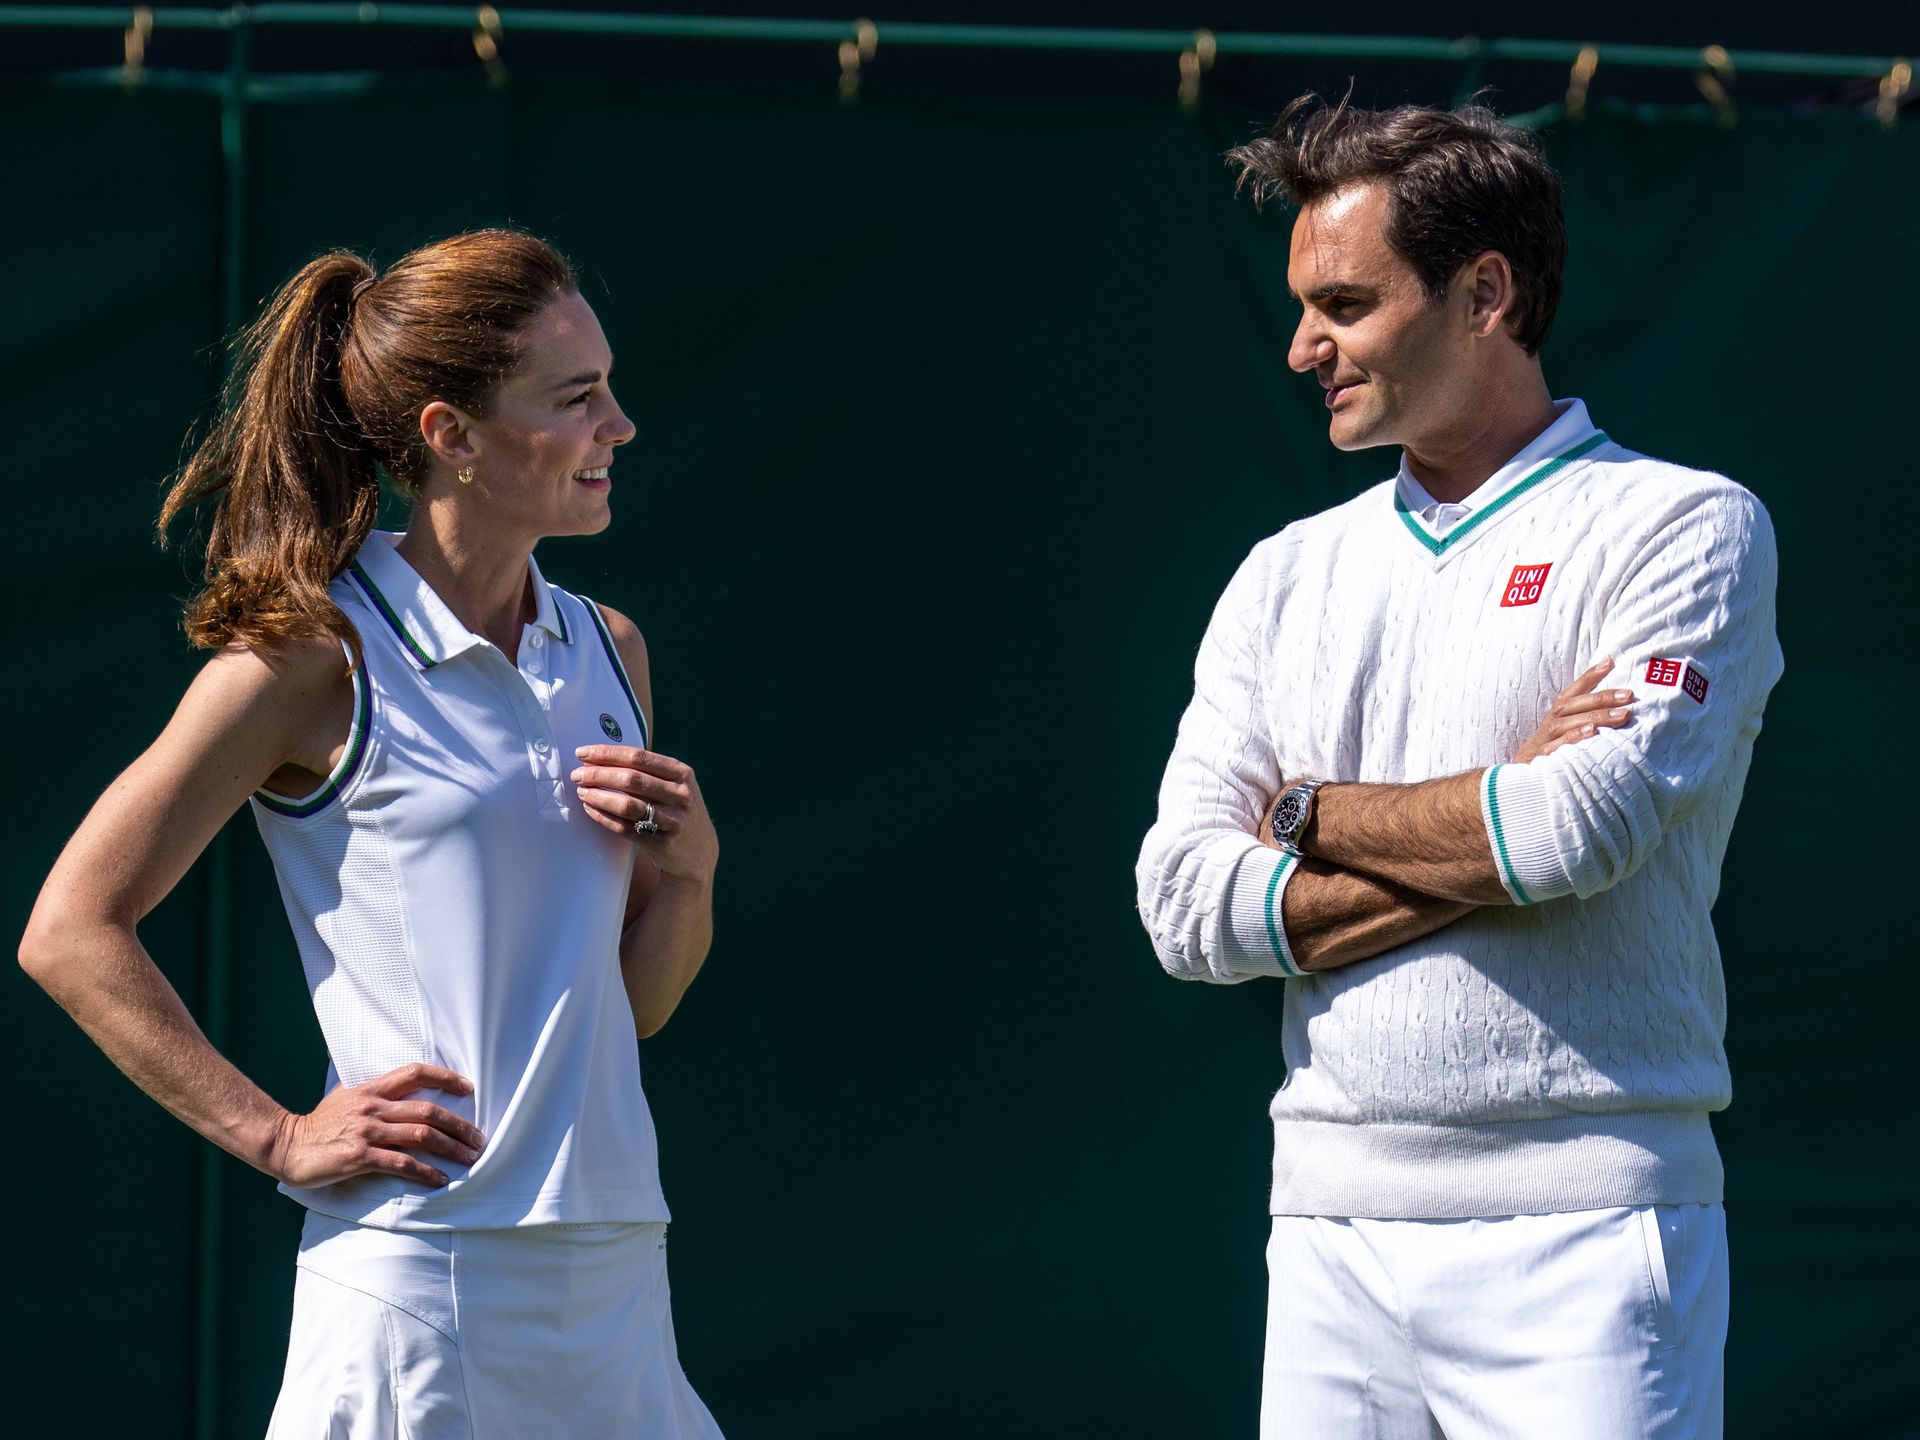 Wimbledon's 'ridiculous rule' that sees female players forced to